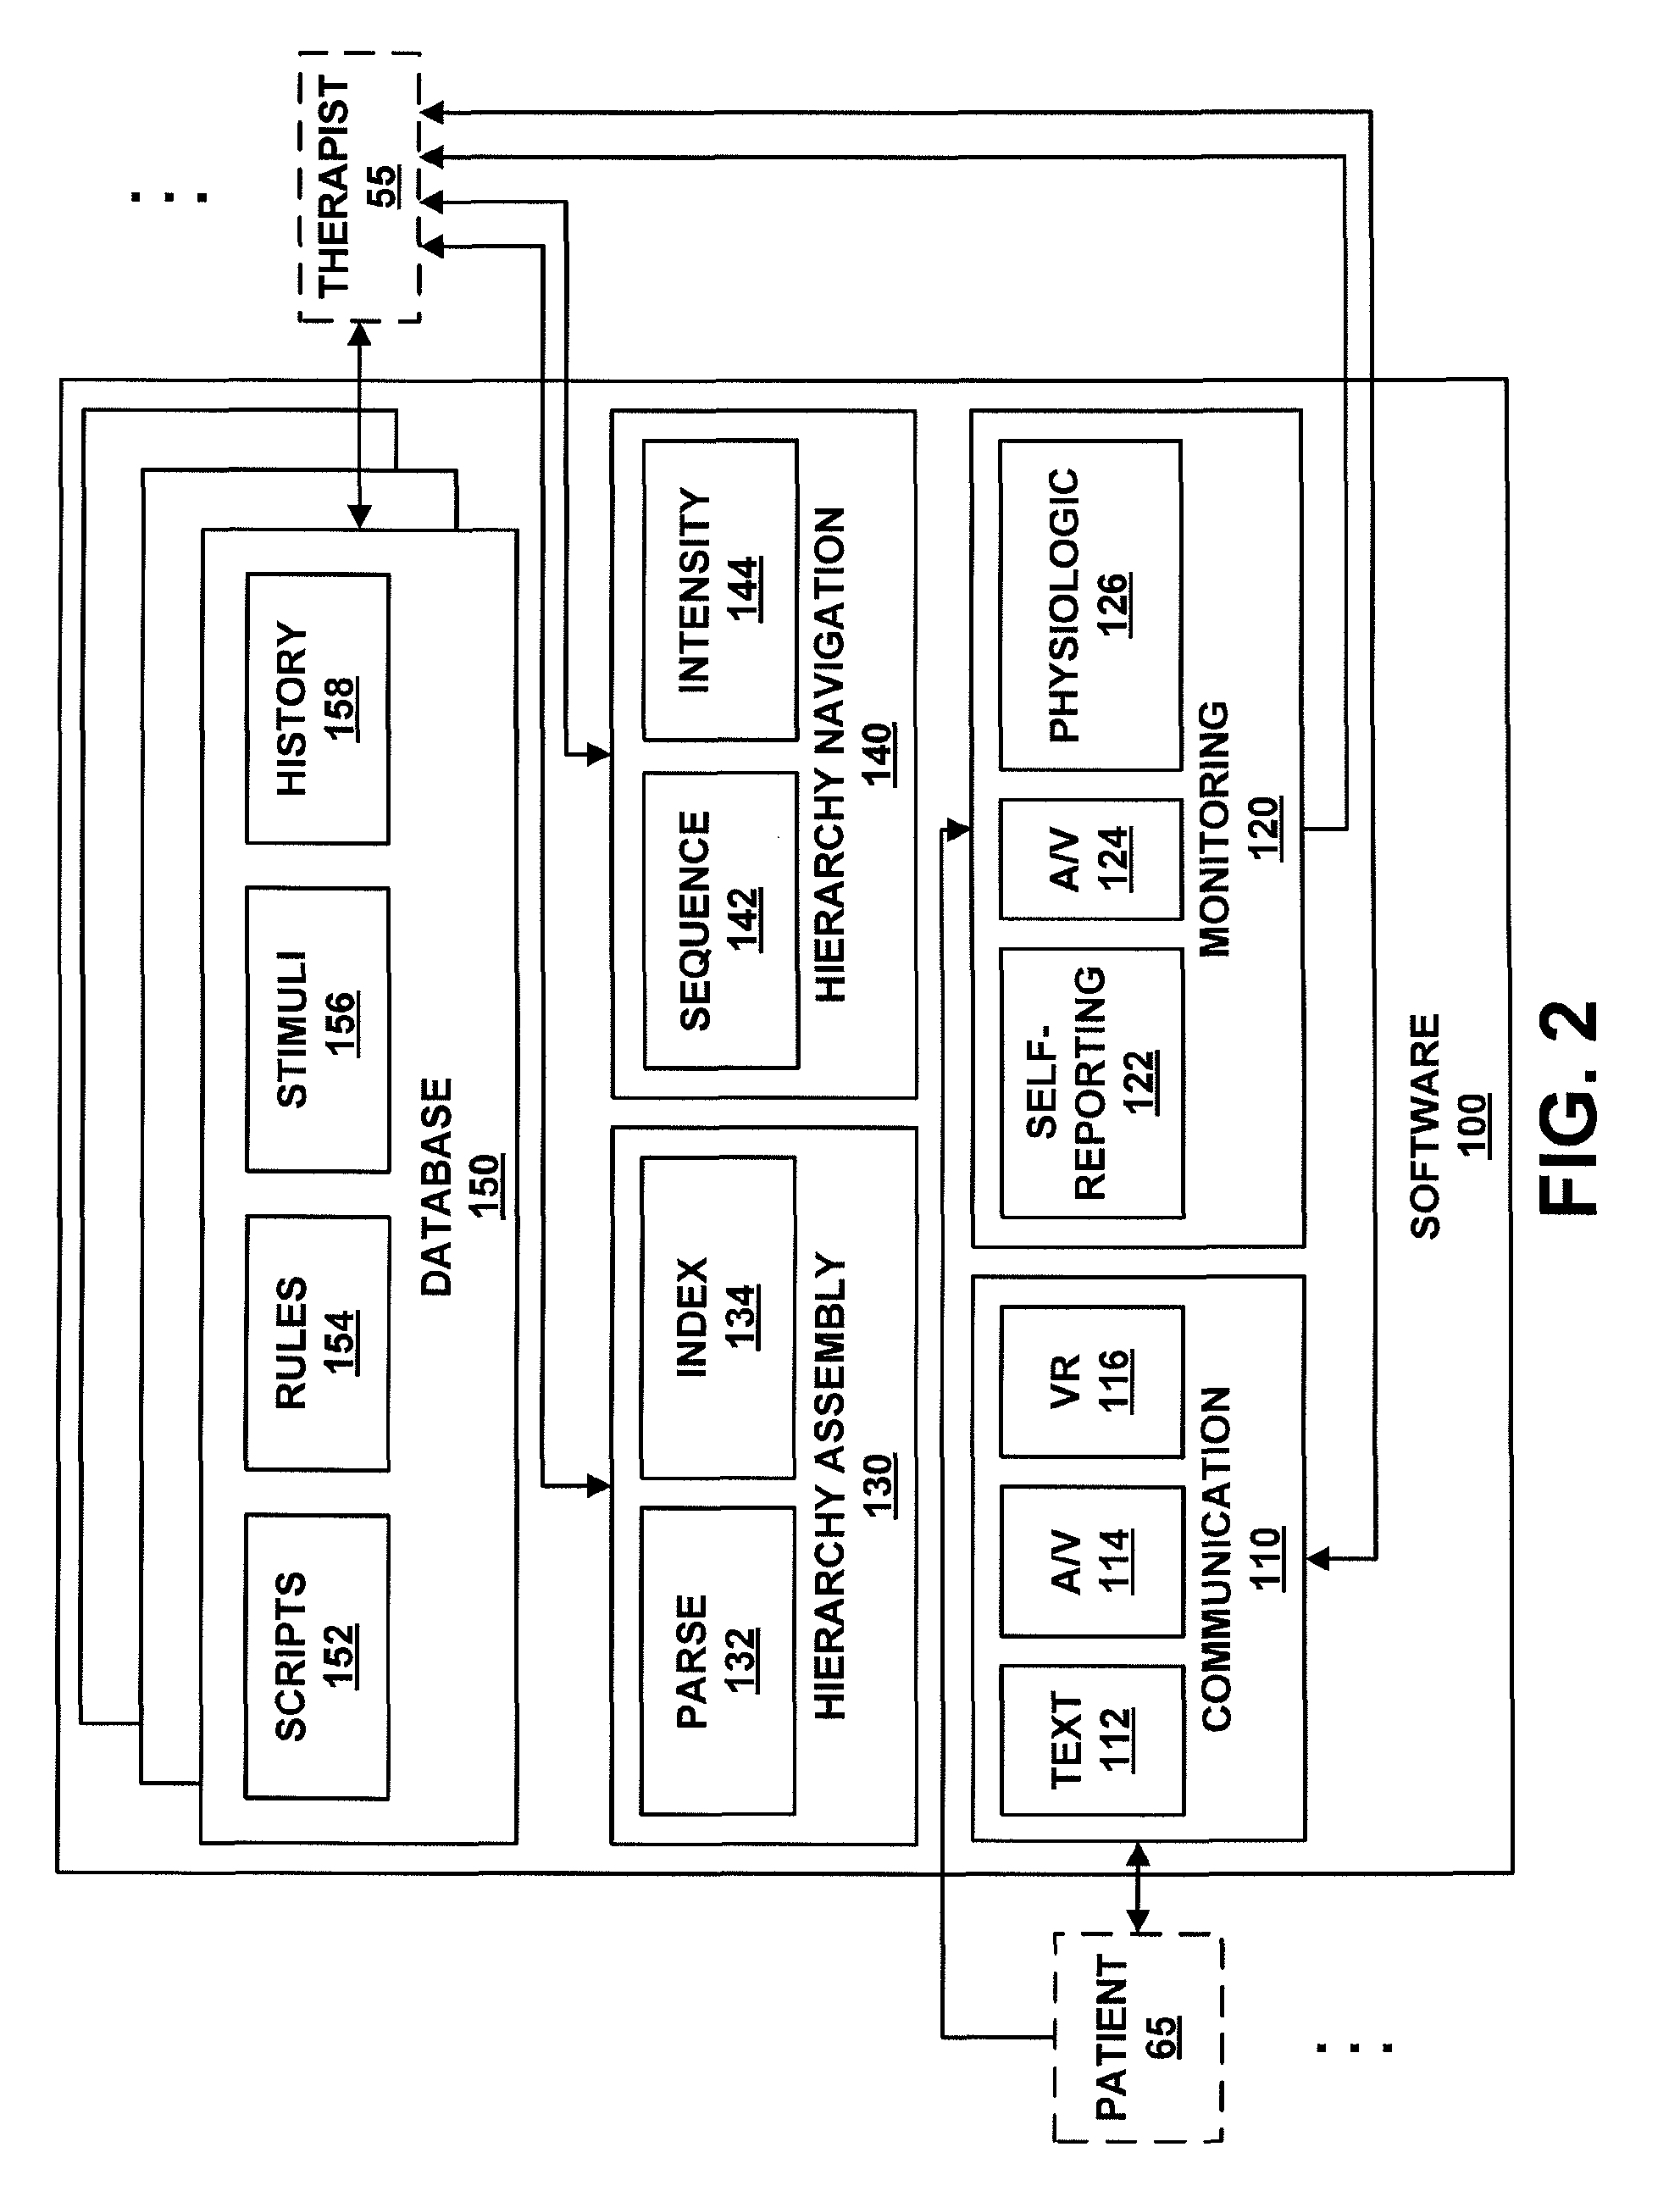 Device, system, and method for treating psychiatric disorders